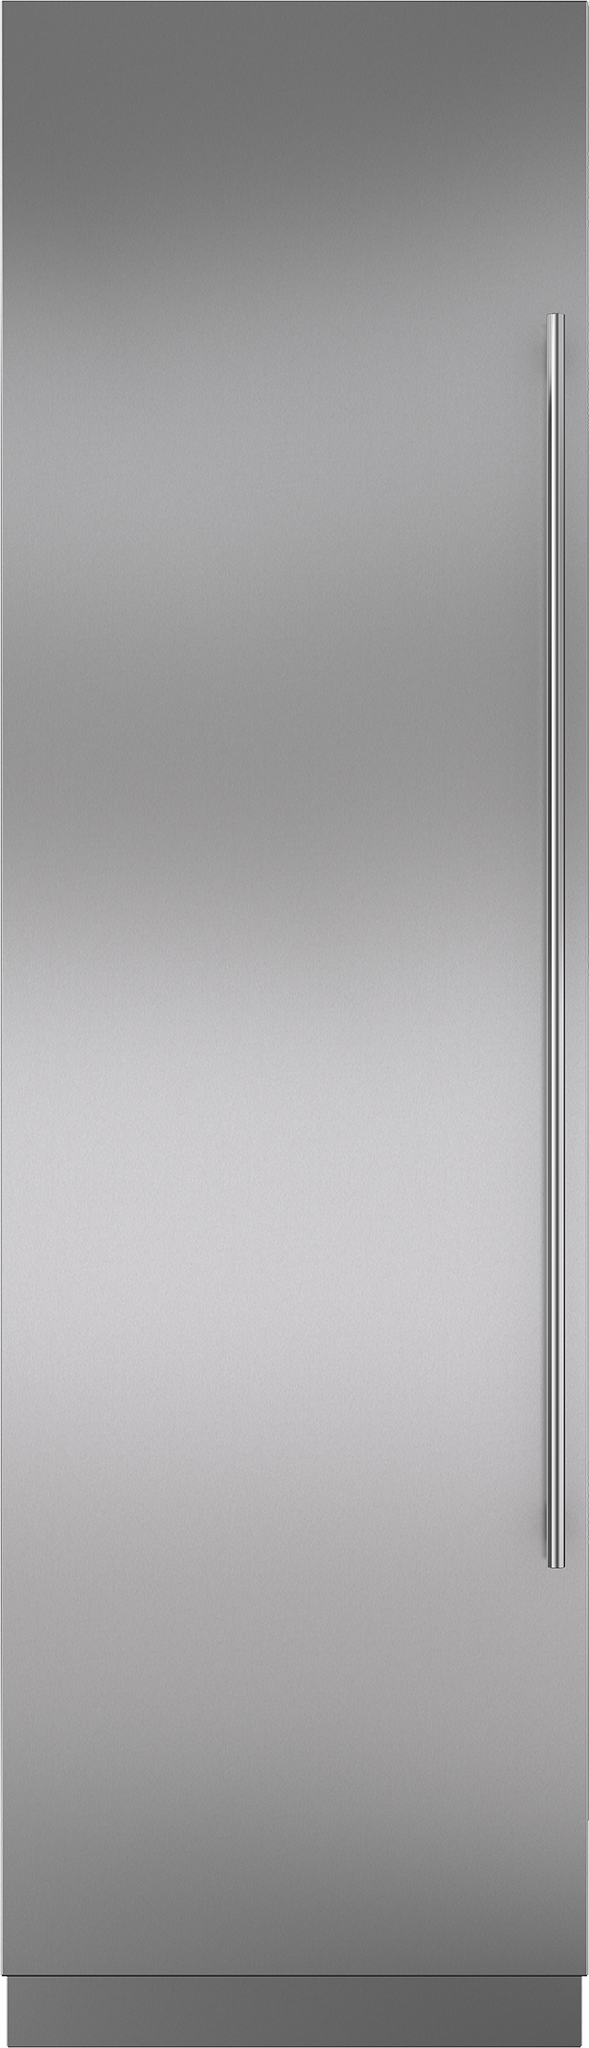 Stainless Steel Door Panel with Tubular Handle and 4